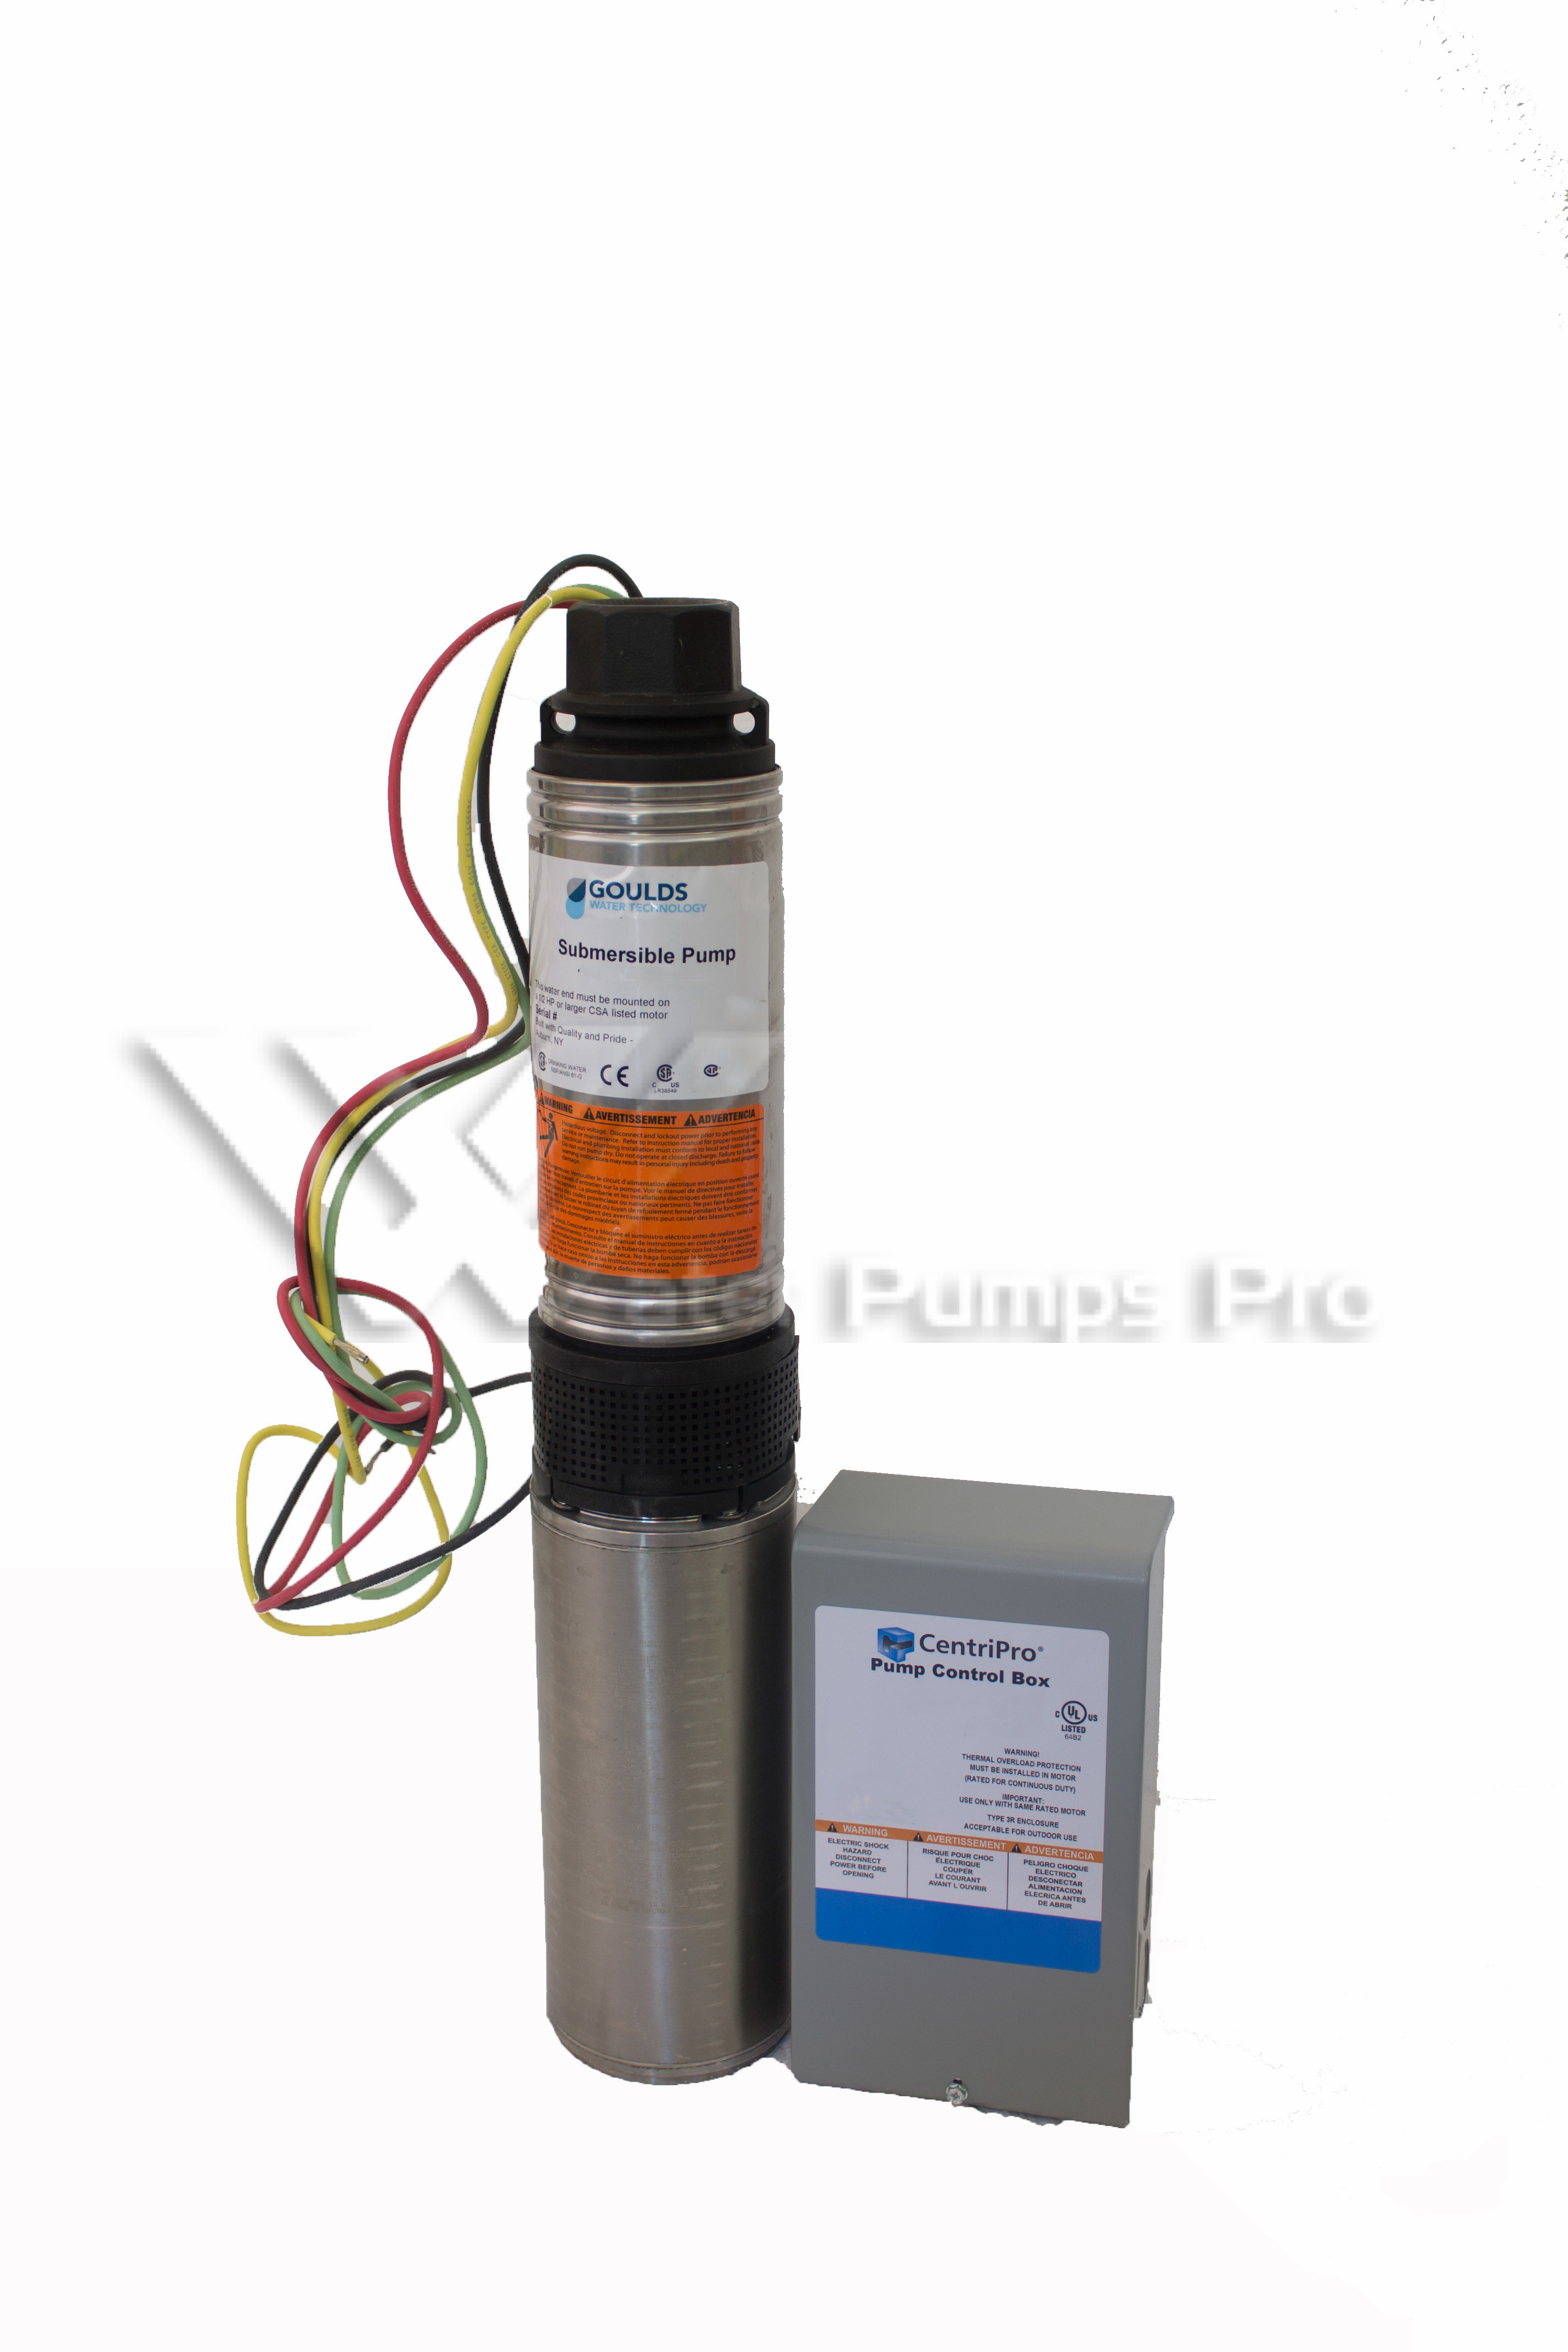 Goulds 25HS10412C Submersible Water Well Pump 1HP 230V 3Wire